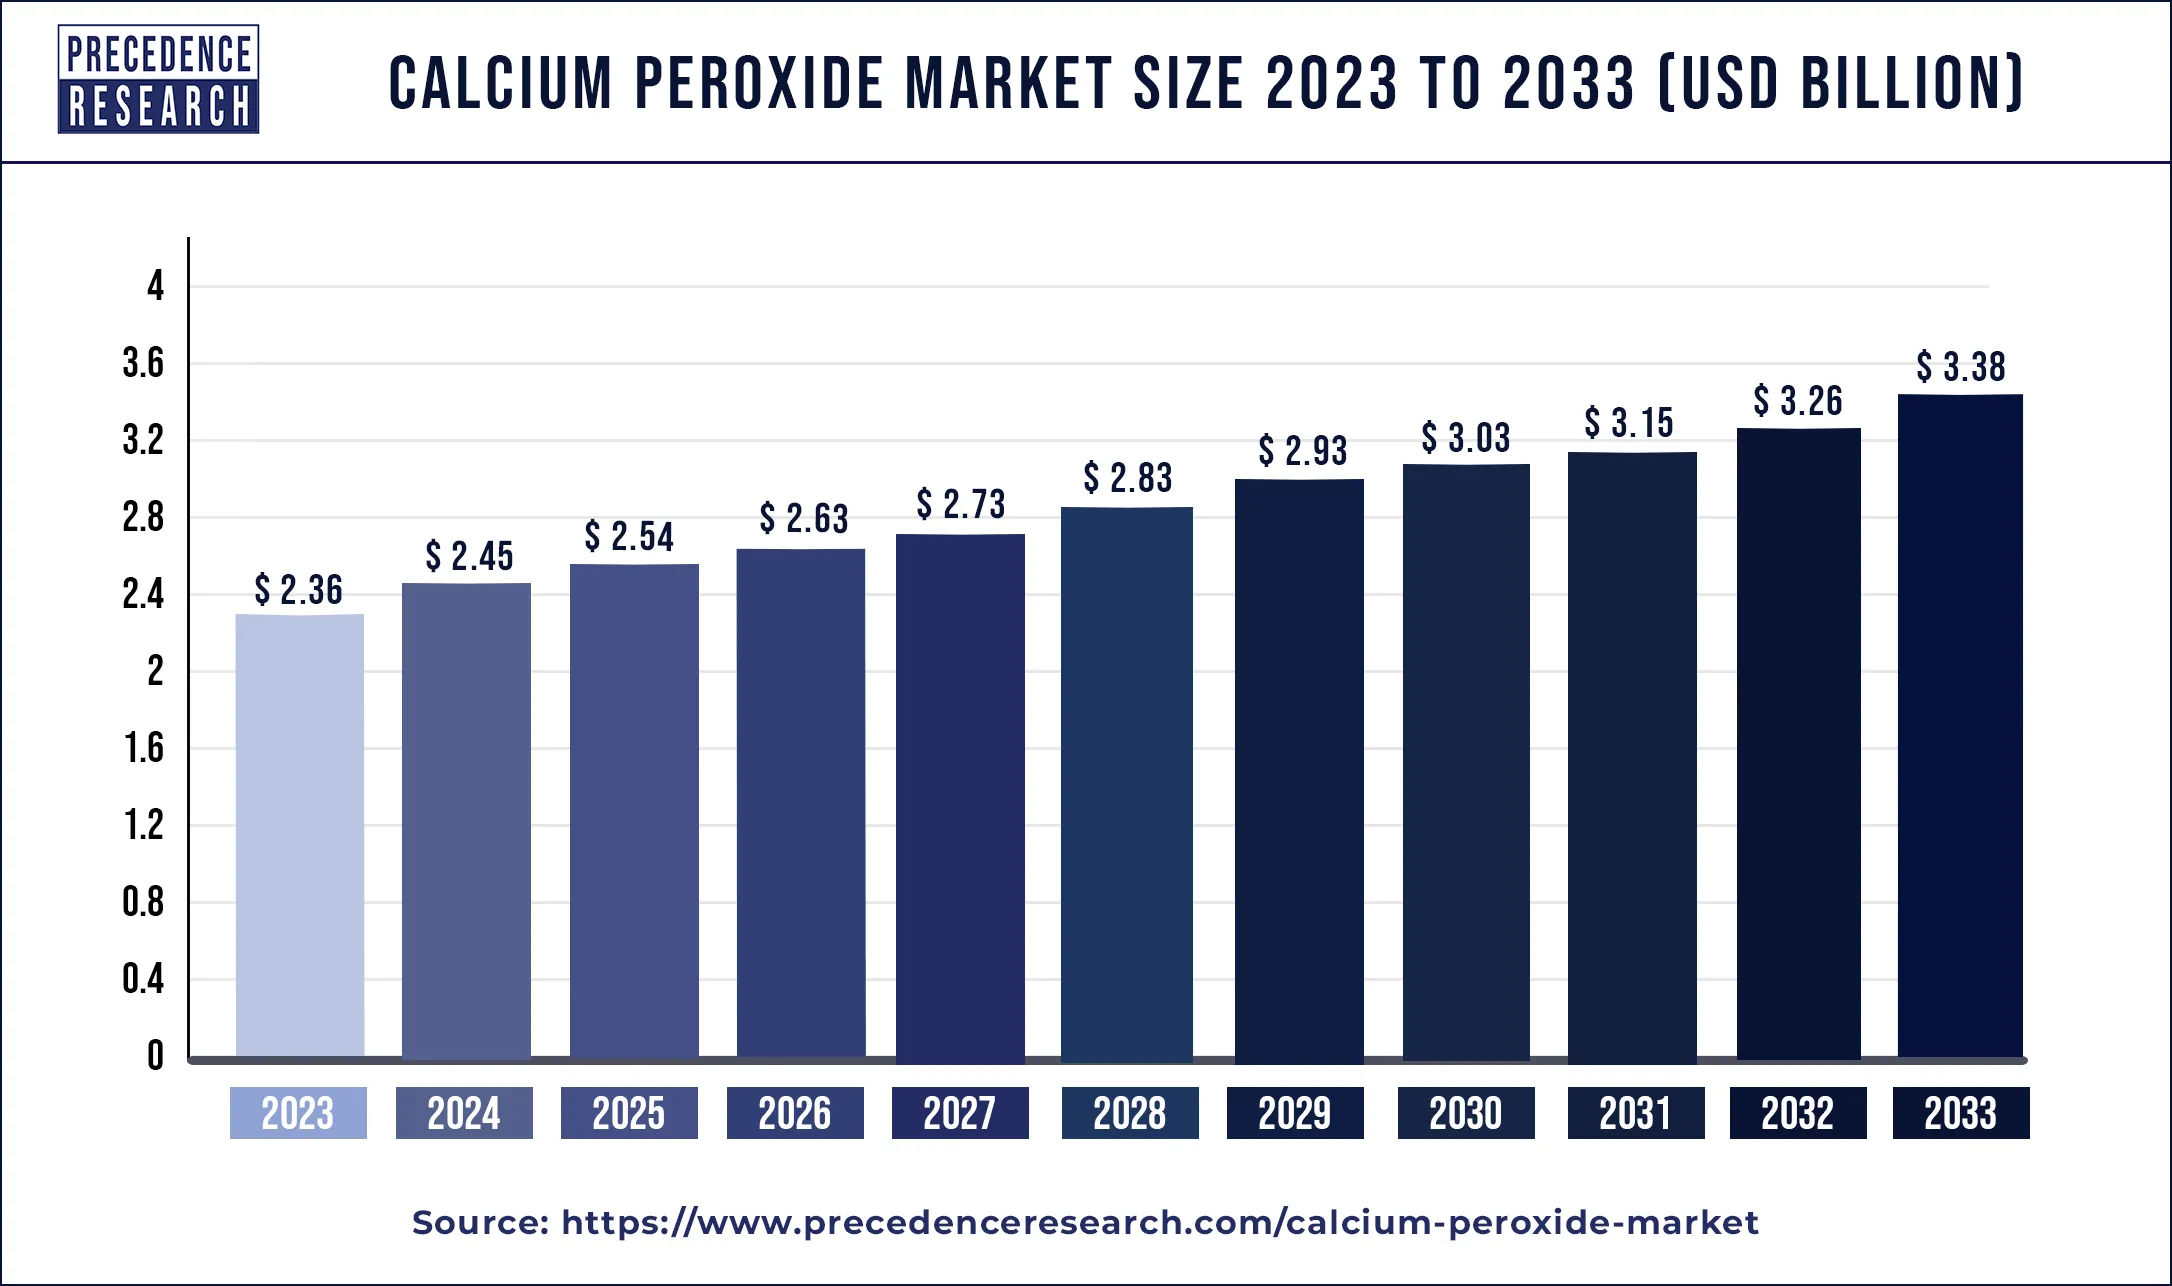 Calcium Peroxide Market Size 2024 to 2033